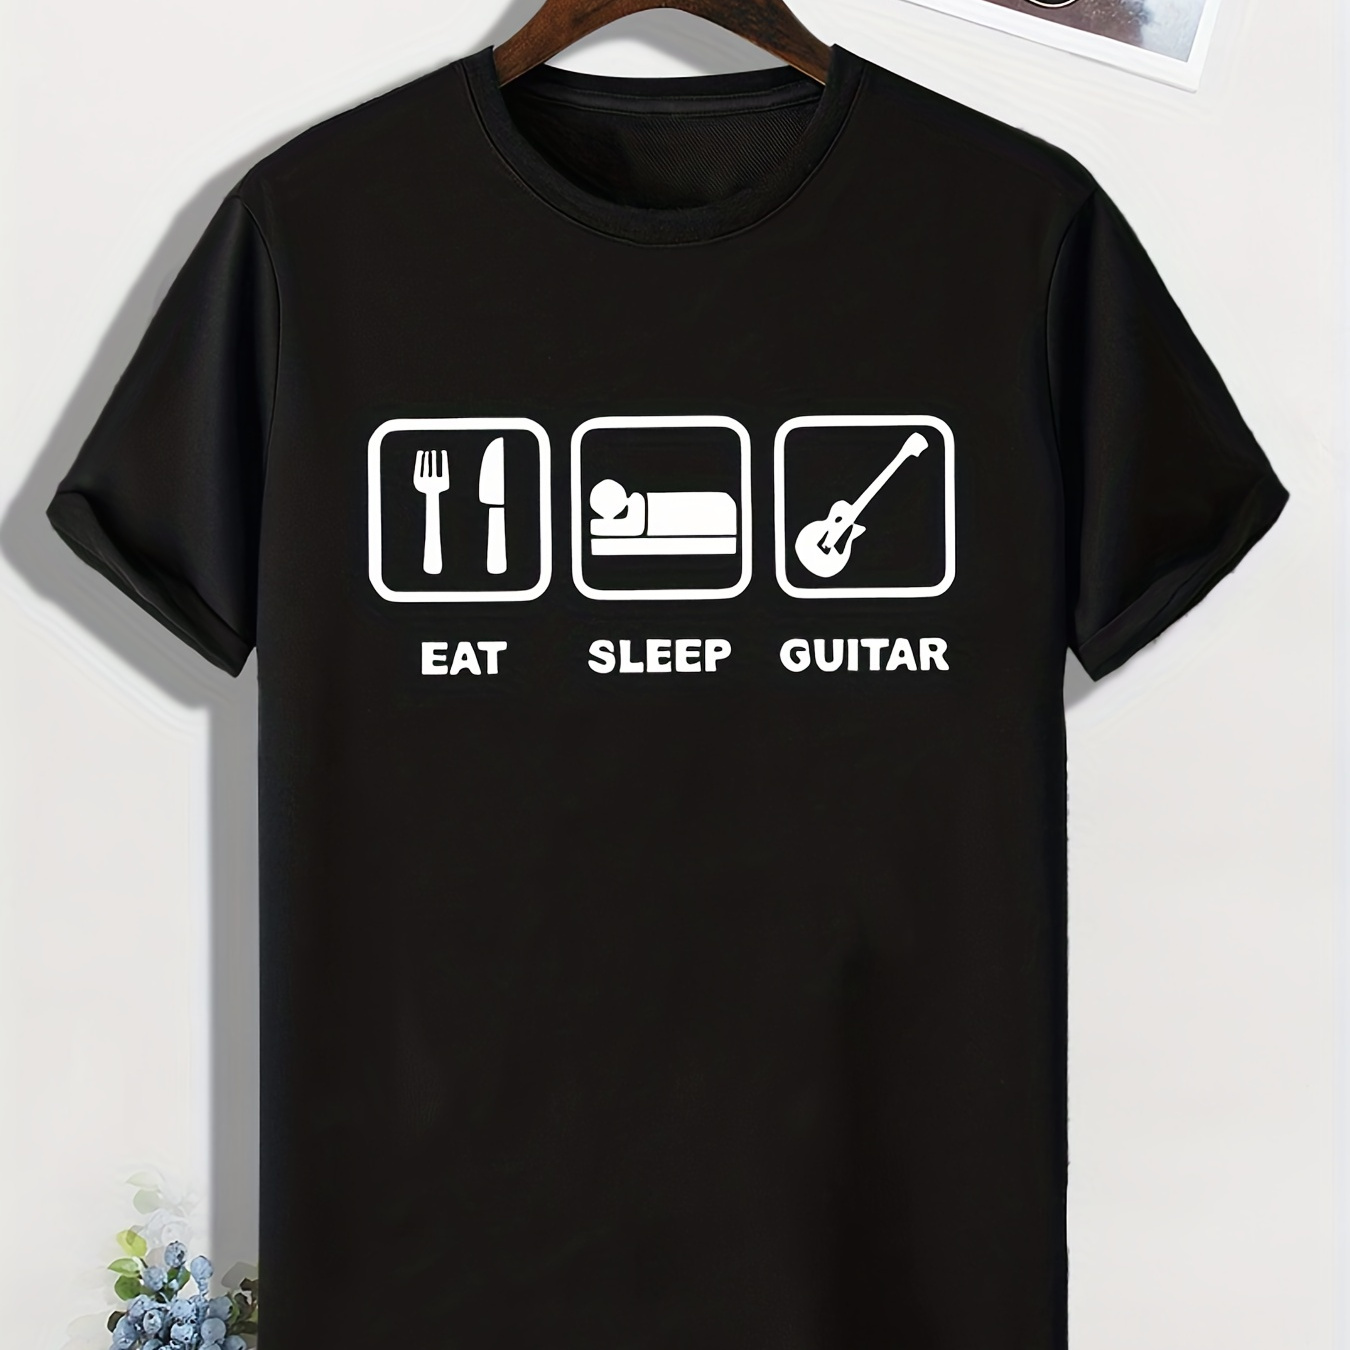 

Eat Sleep Guitar Print, Men's Trendy Comfy T-shirt, Active Slightly Stretch Breathable Tee For Outdoor Summer